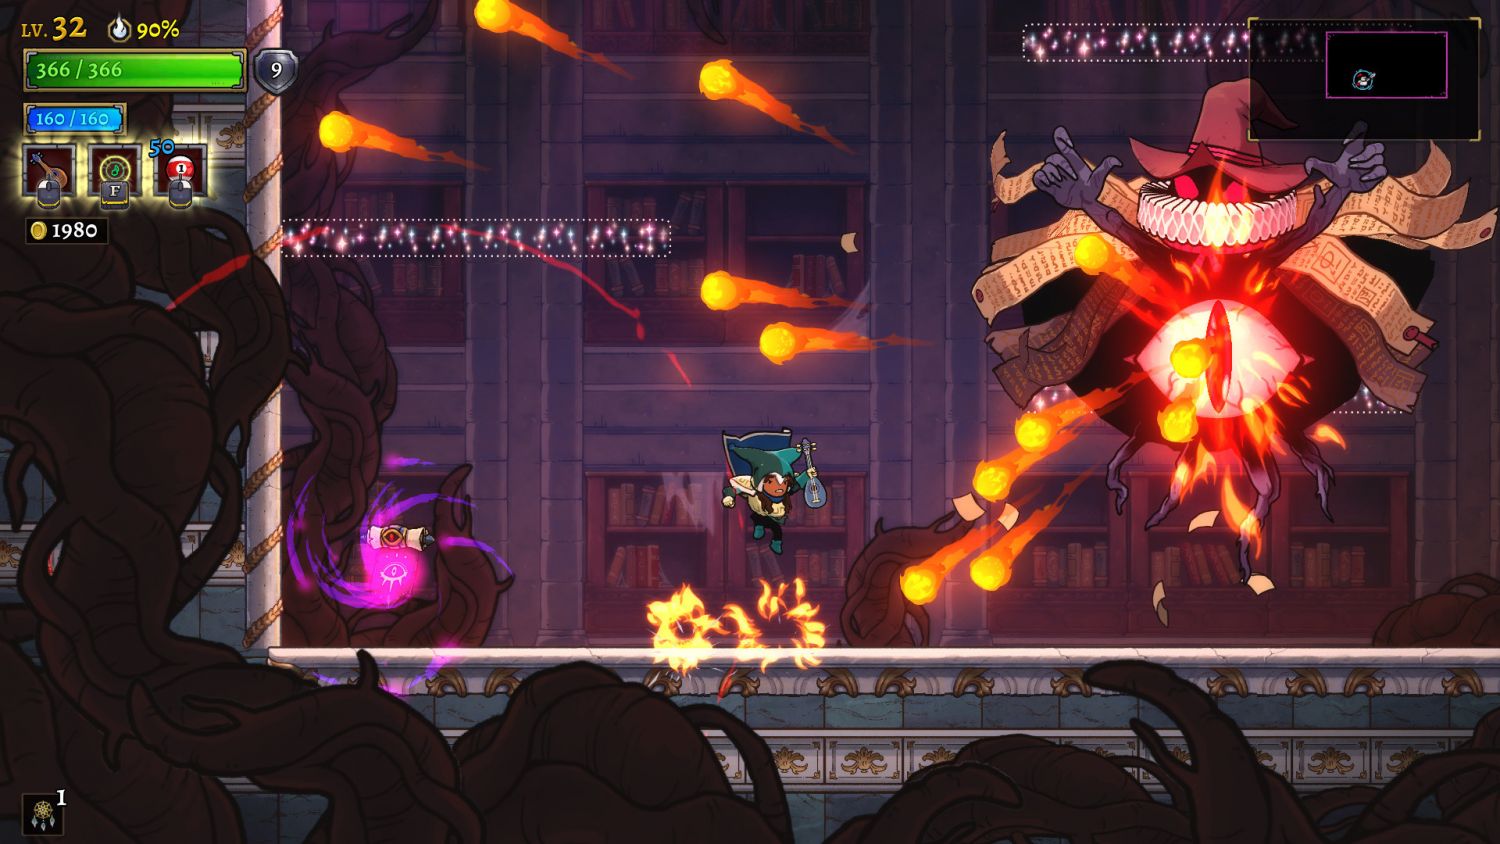 Geek Review: Rogue Legacy 2 - Battles are fun